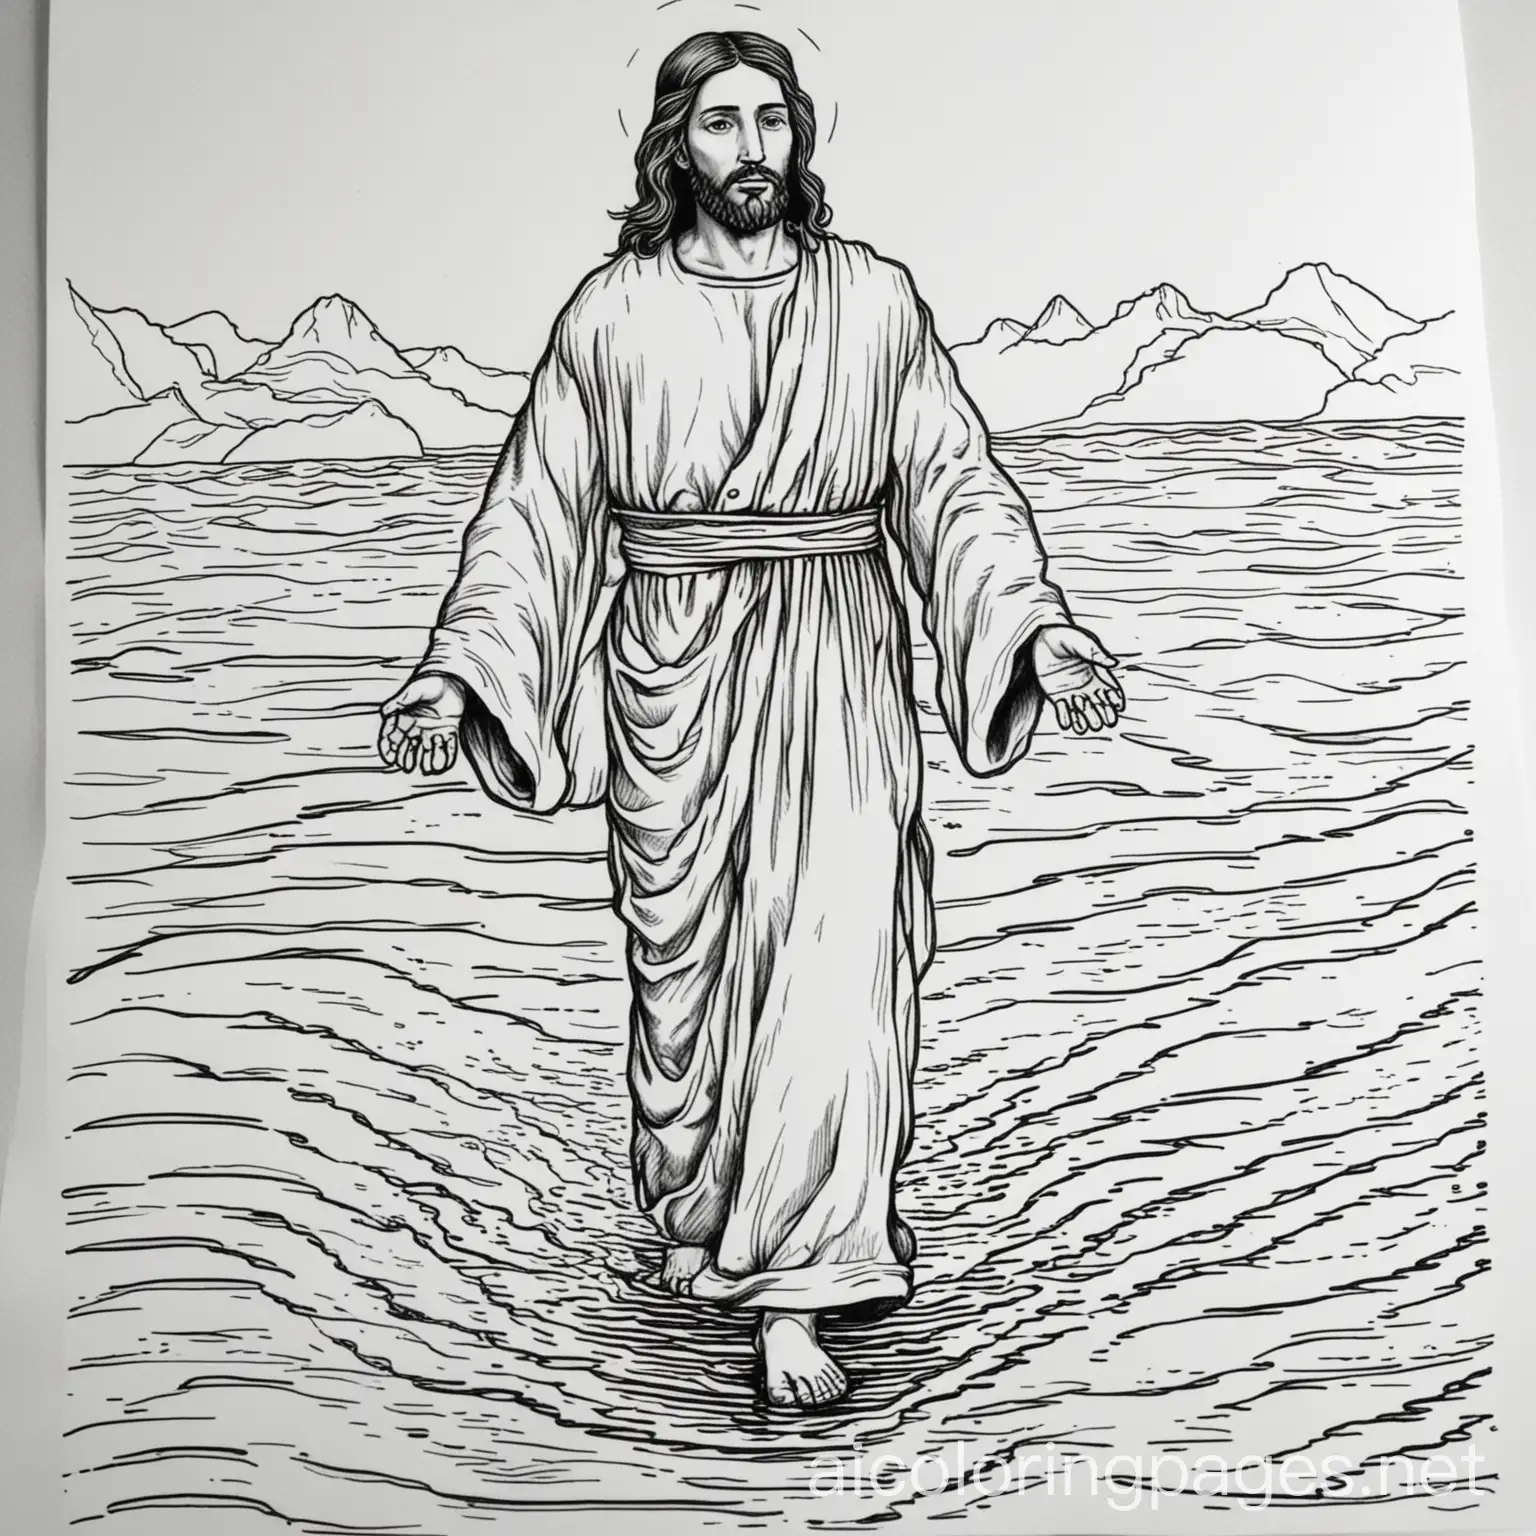 Jesus walking on the water, Coloring Page, black and white, line art, white background, Simplicity, Ample White Space. The background of the coloring page is plain white to make it easy for young children to color within the lines. The outlines of all the subjects are easy to distinguish, making it simple for kids to color without too much difficulty